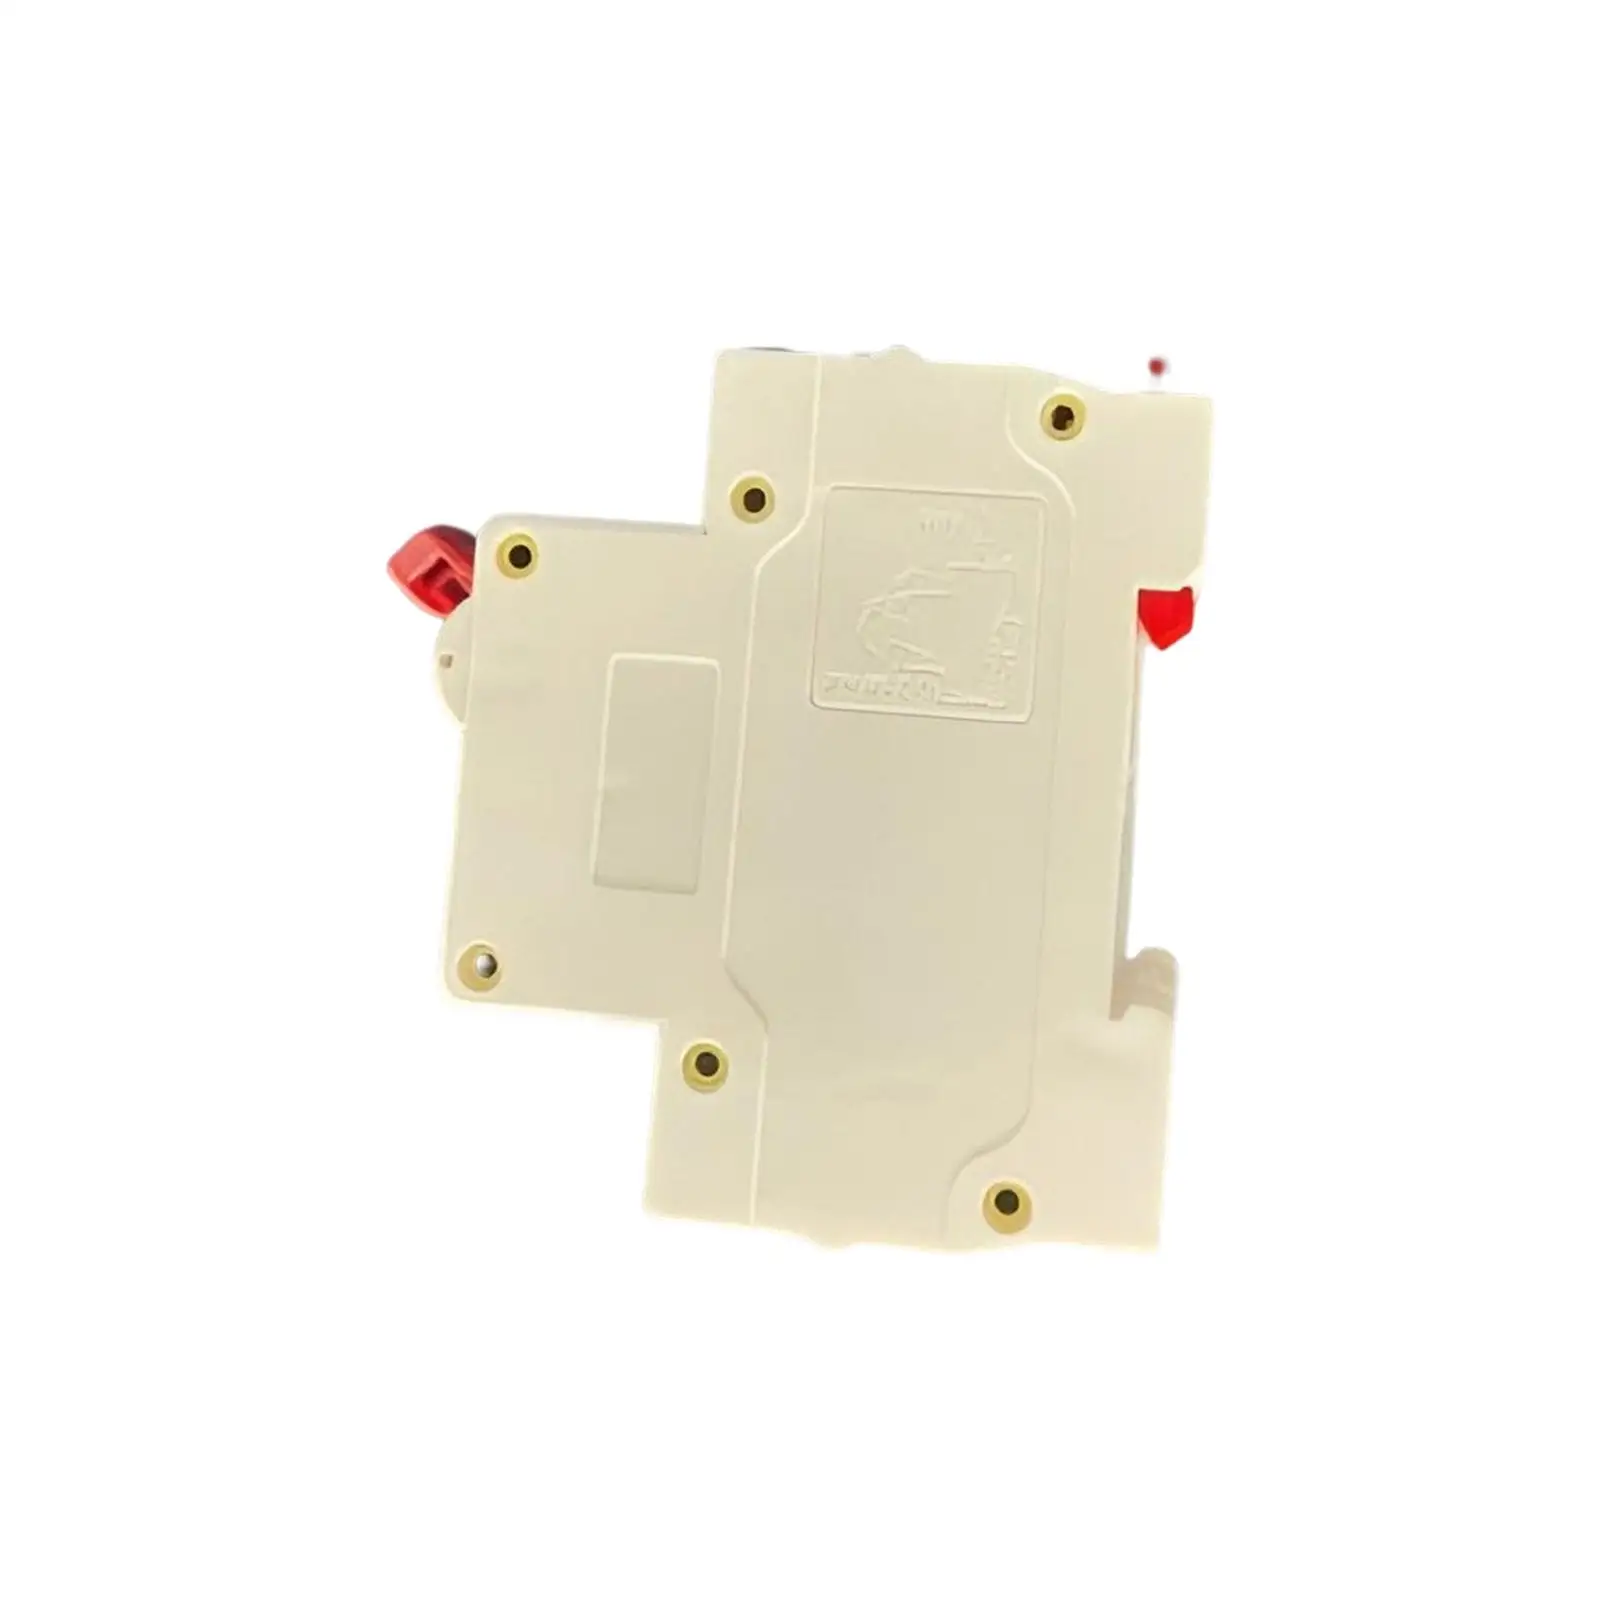 2P 1000V Miniature Circuit Breaker for High Low Voltage Equipment DC Disconnect Switch PV Isolator